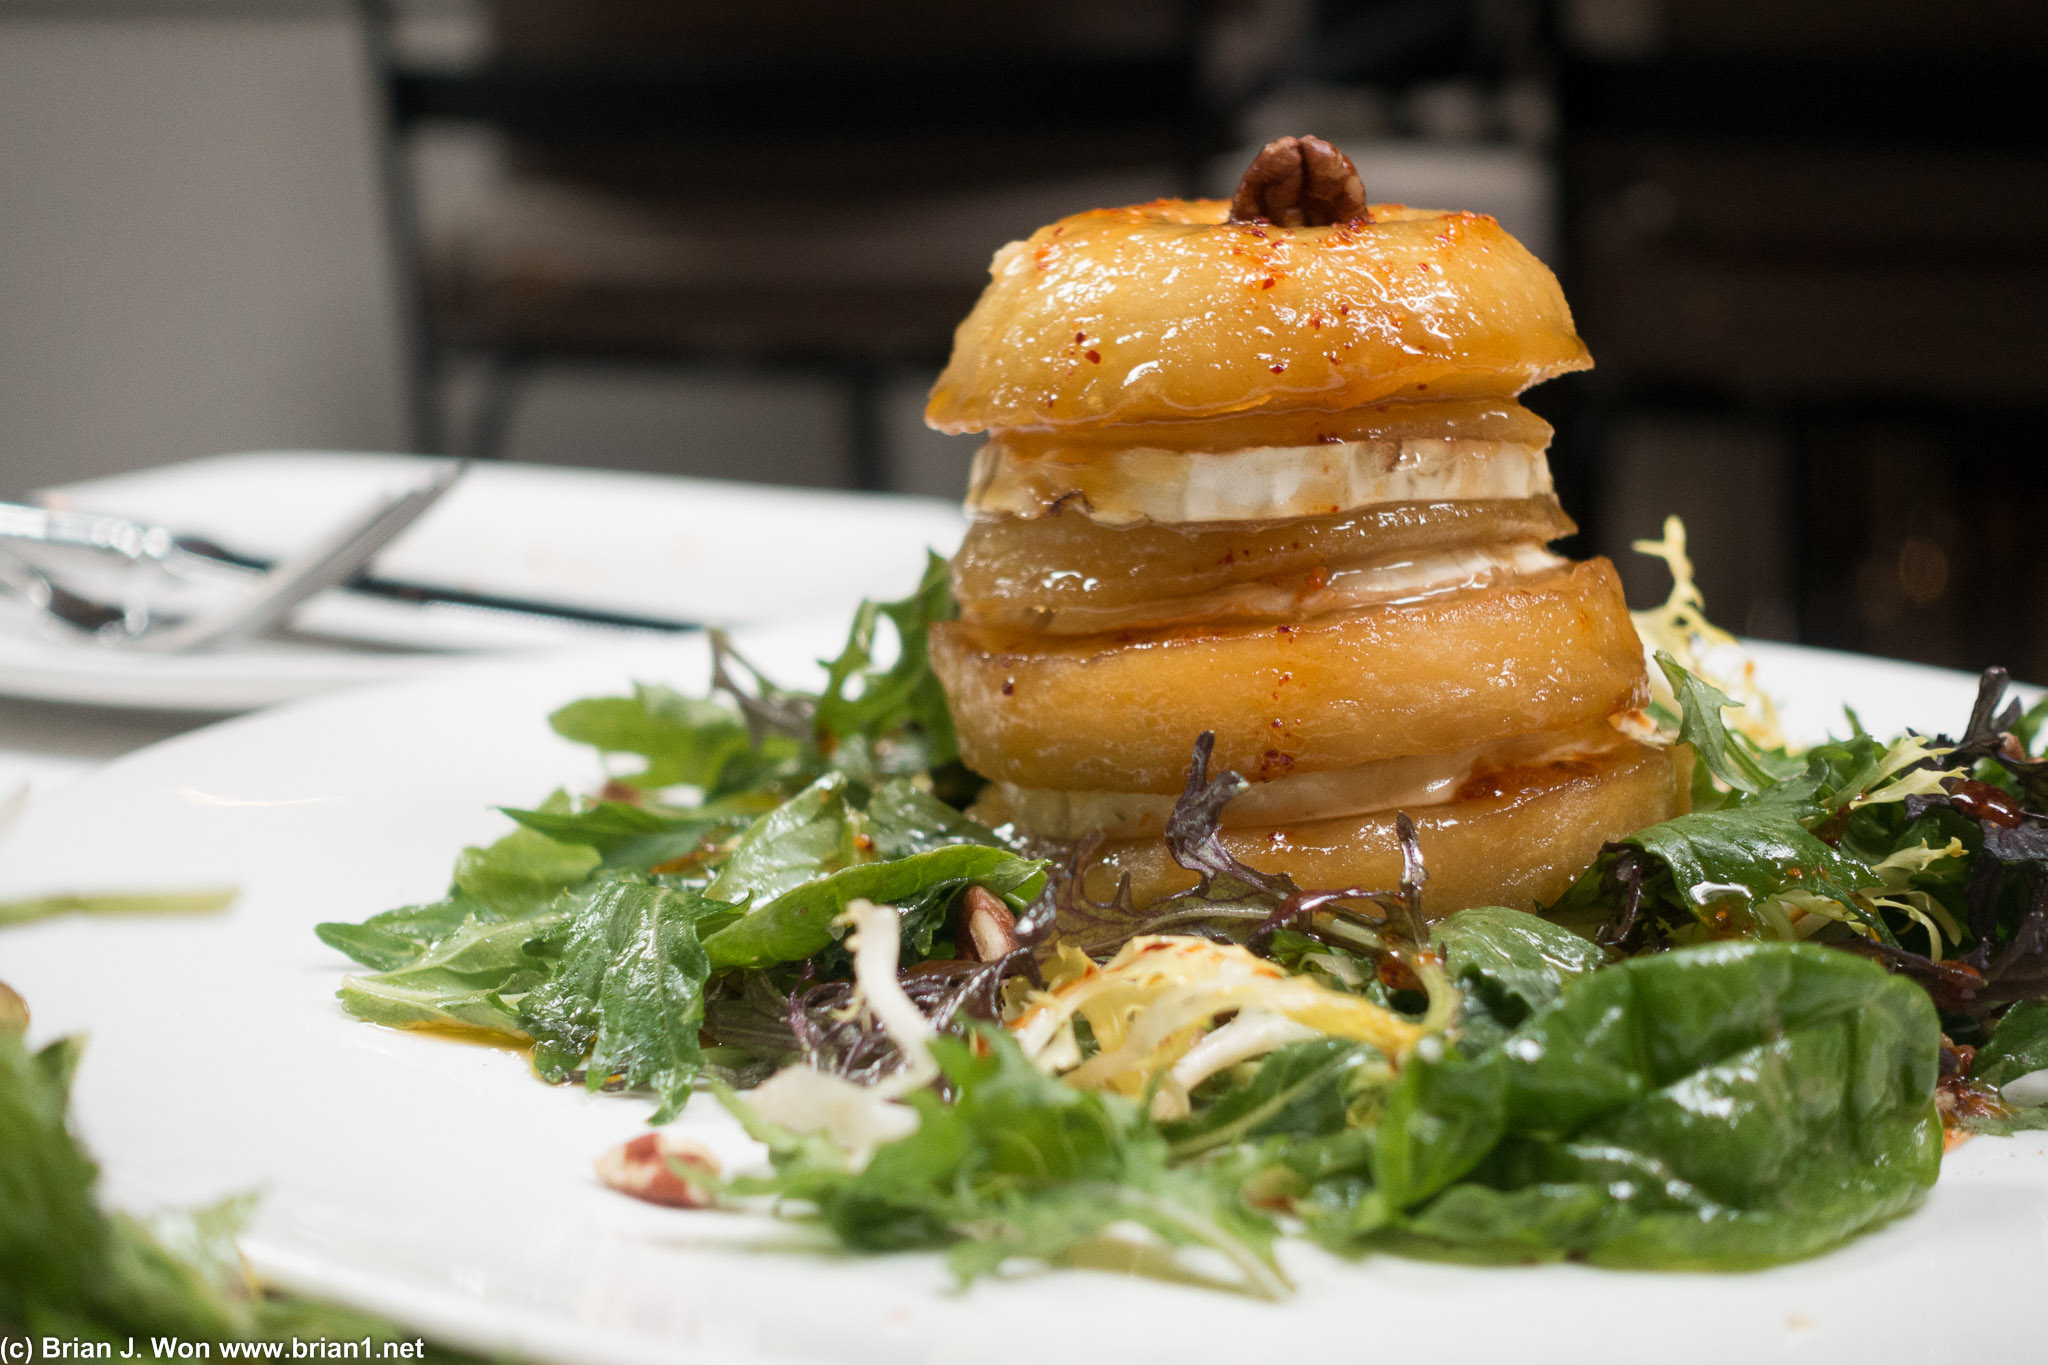 Goat cheese and caramelized apple millefeuille, superb when hot.